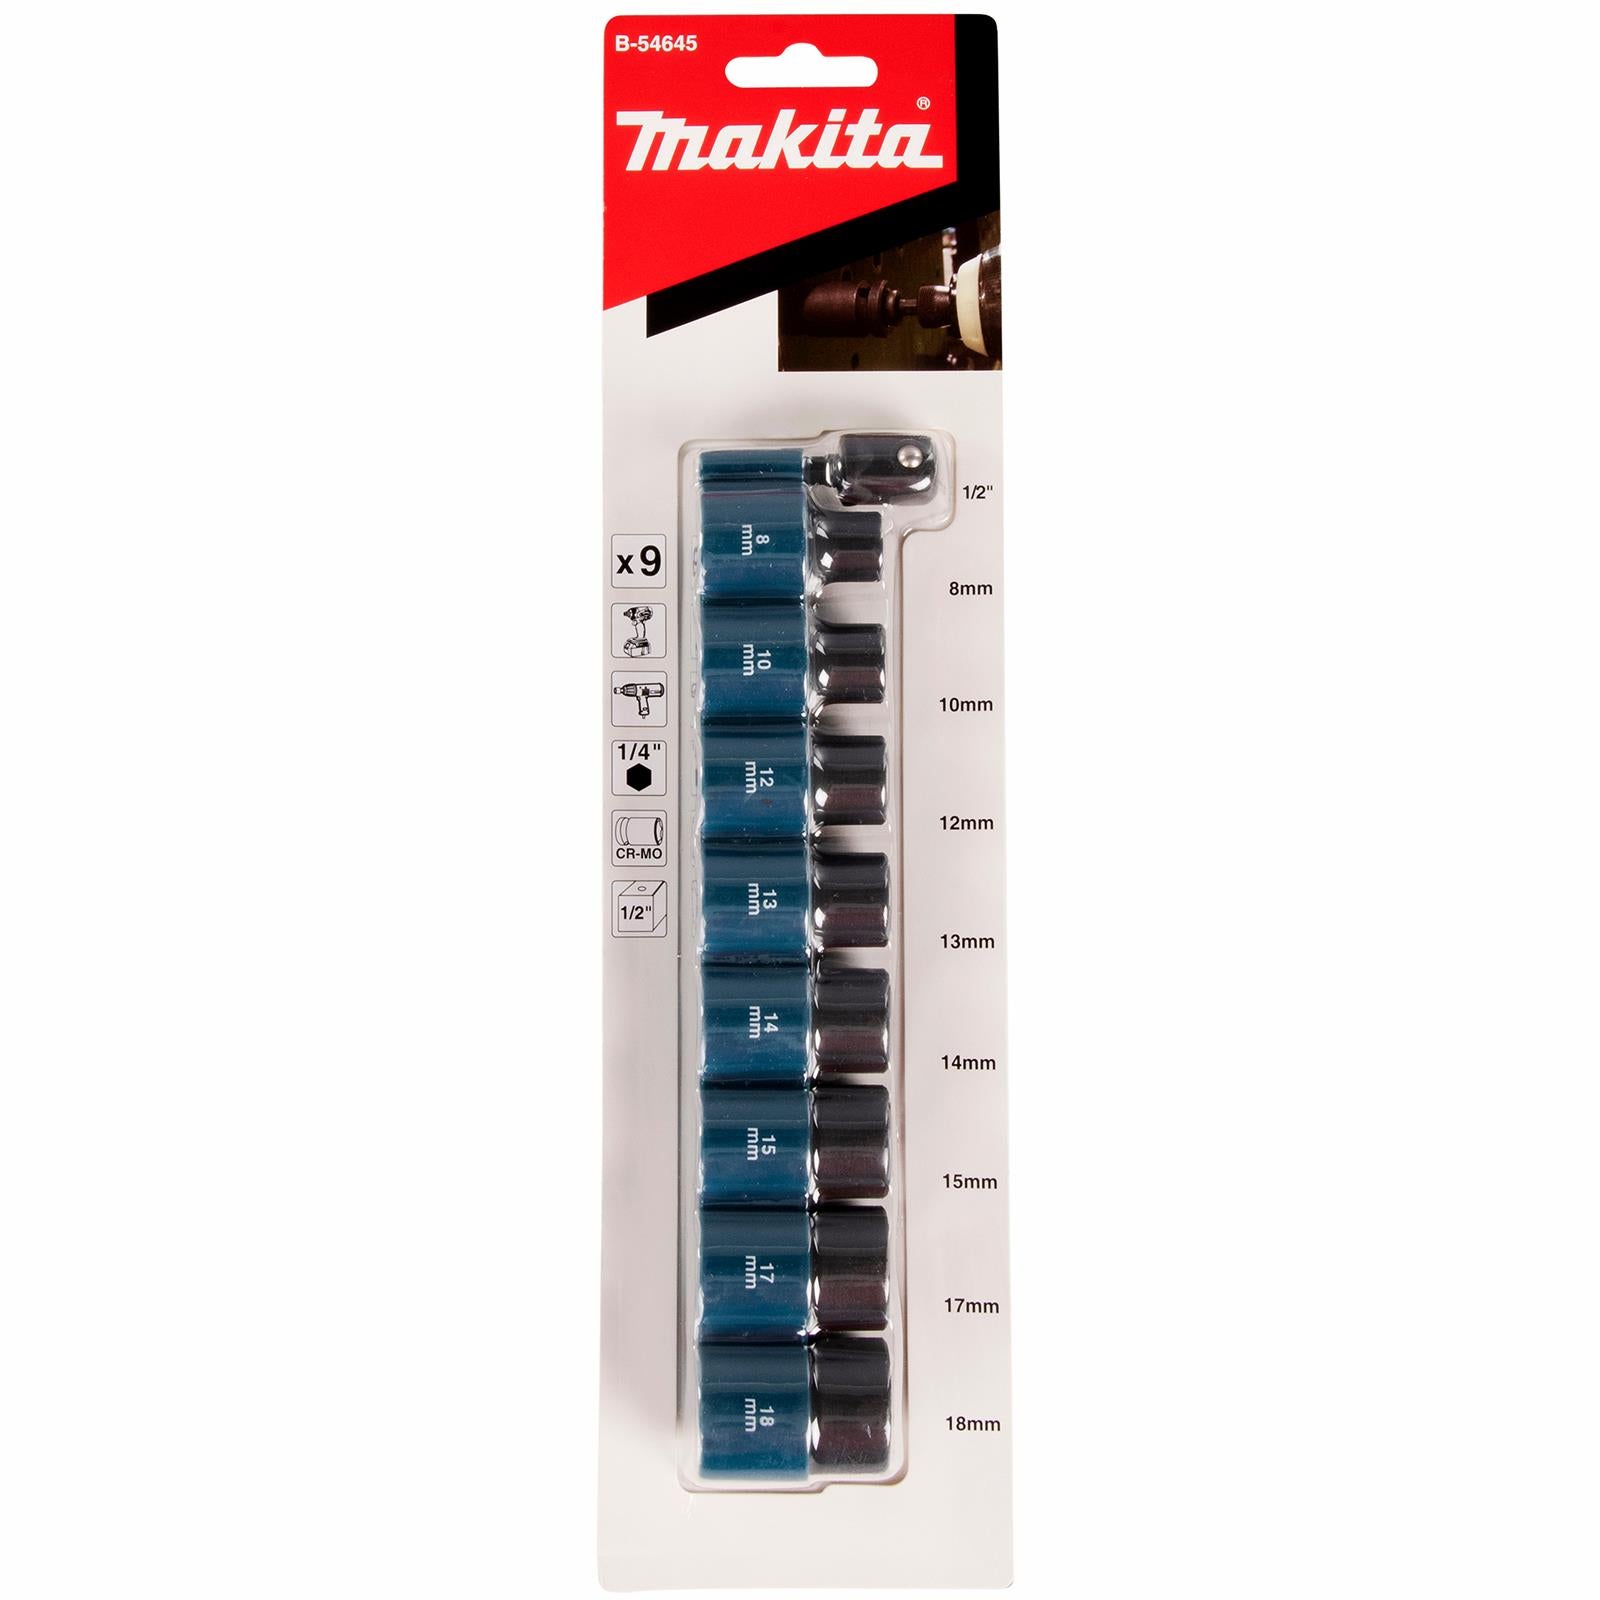 Makita Impact Socket Set 1/2" Drive 8-18mm with 1/4" Hex to 1/2" Drive Adaptor for Impact Driver 9 Piece